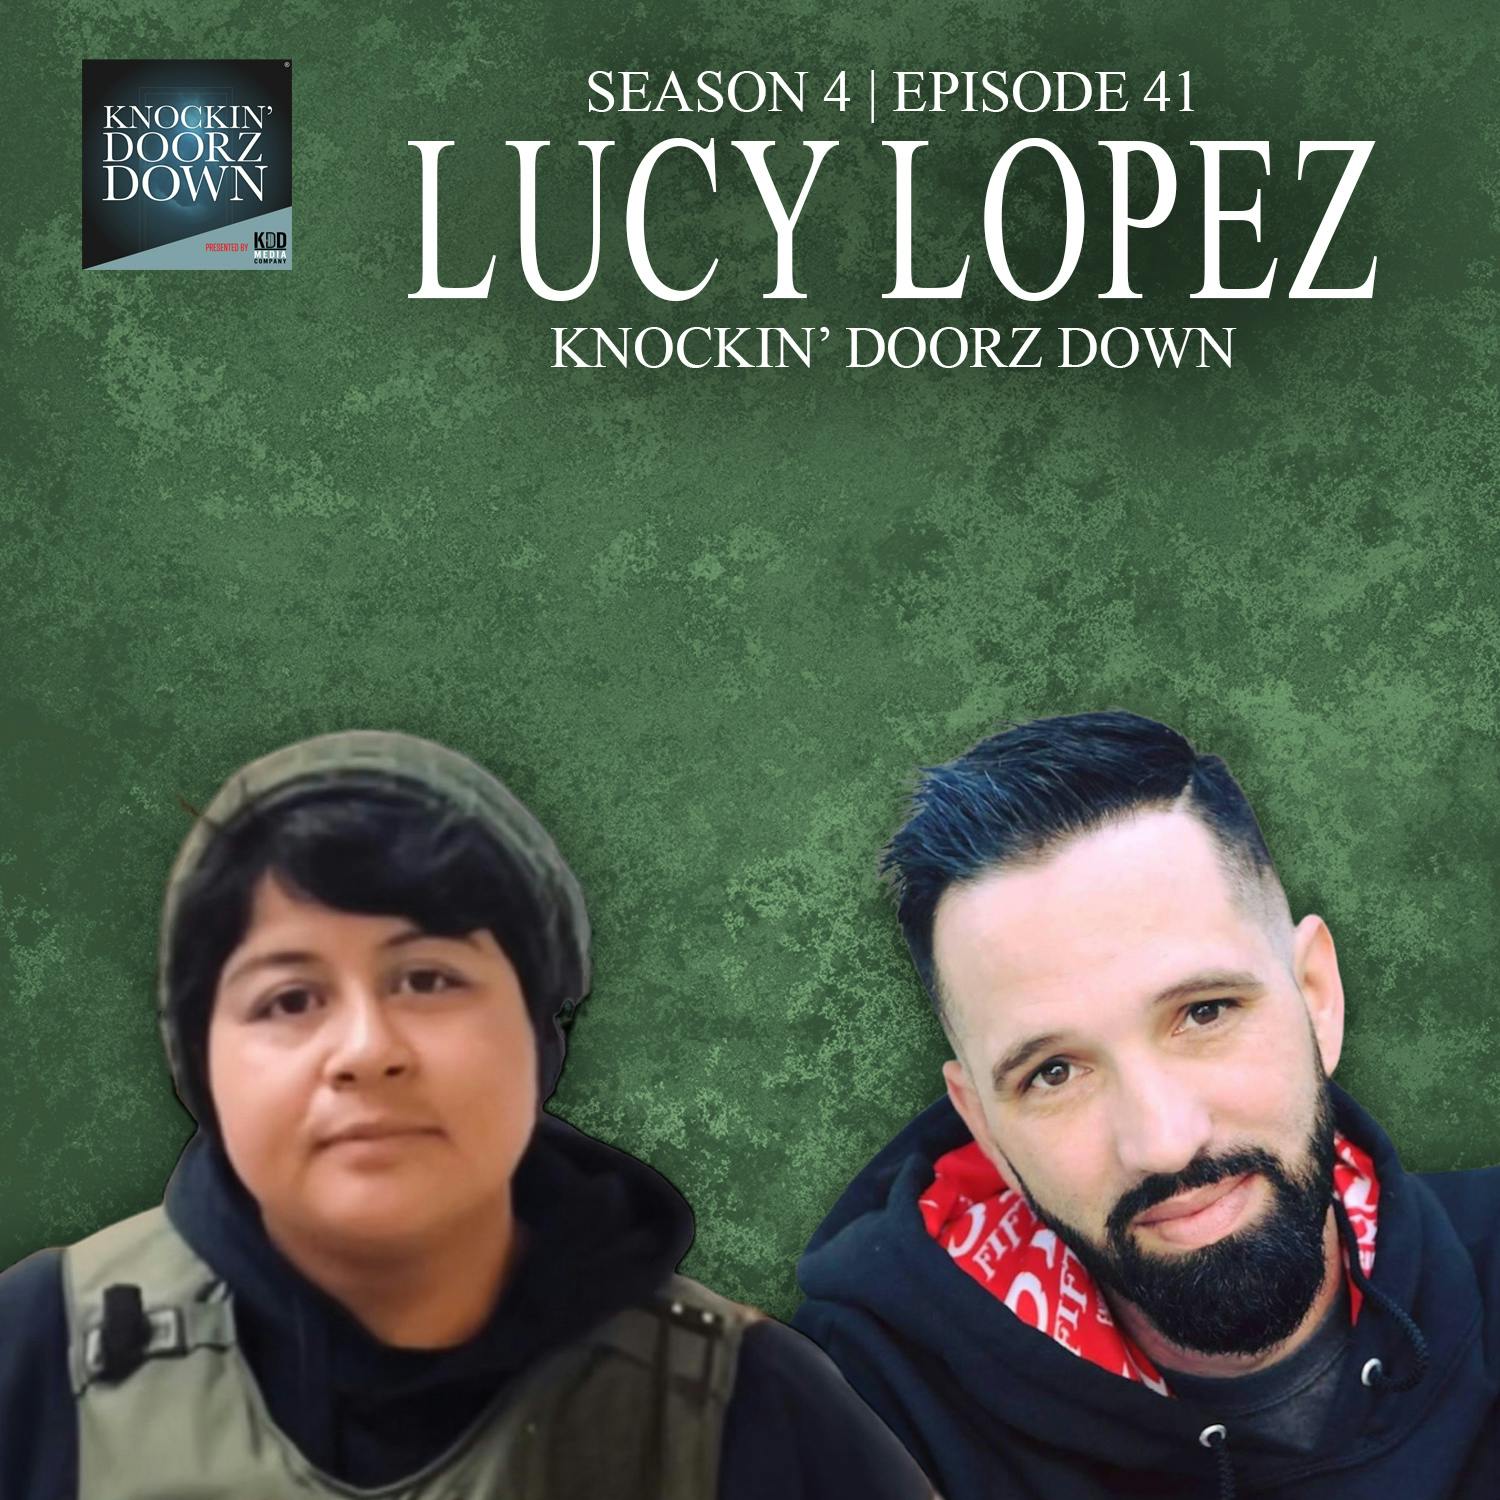 Shot In The Line Of Duty, Confronting PTSD, Transcending Environment & Finding Purpose Through Boxing With Lucy Lopez